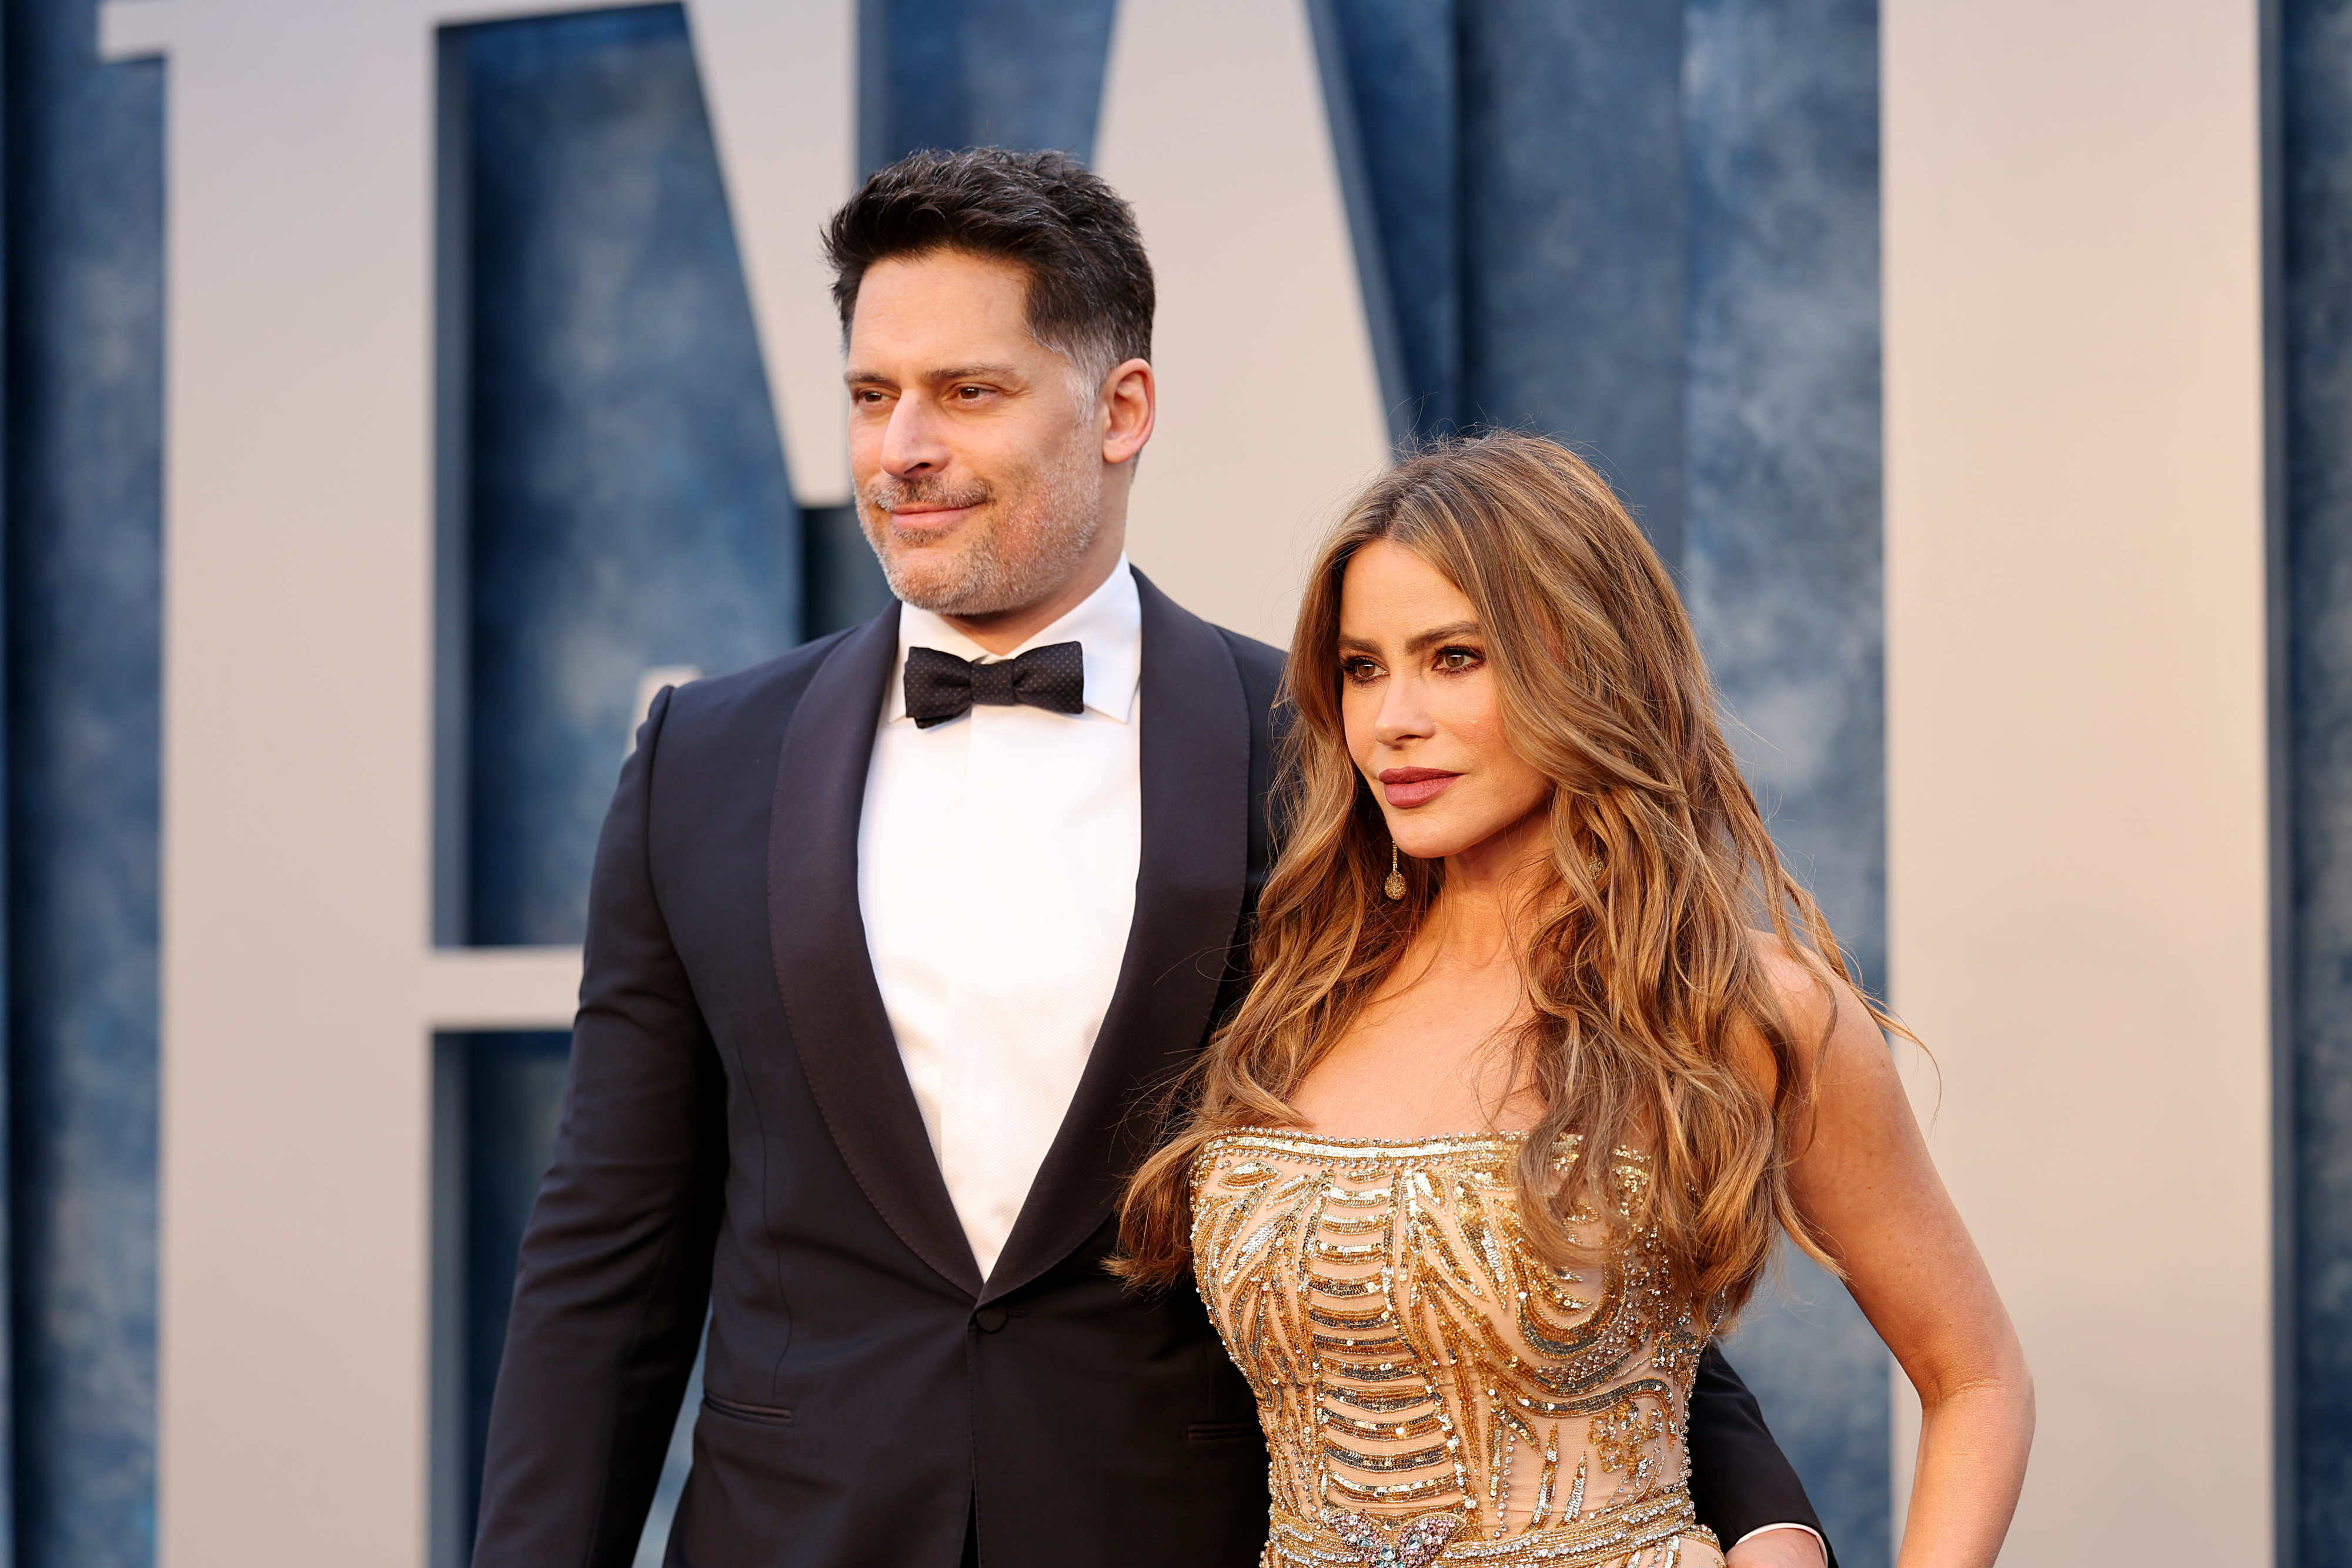 Sofia Vergara Shares the Minimum Age of Men She'll Date After